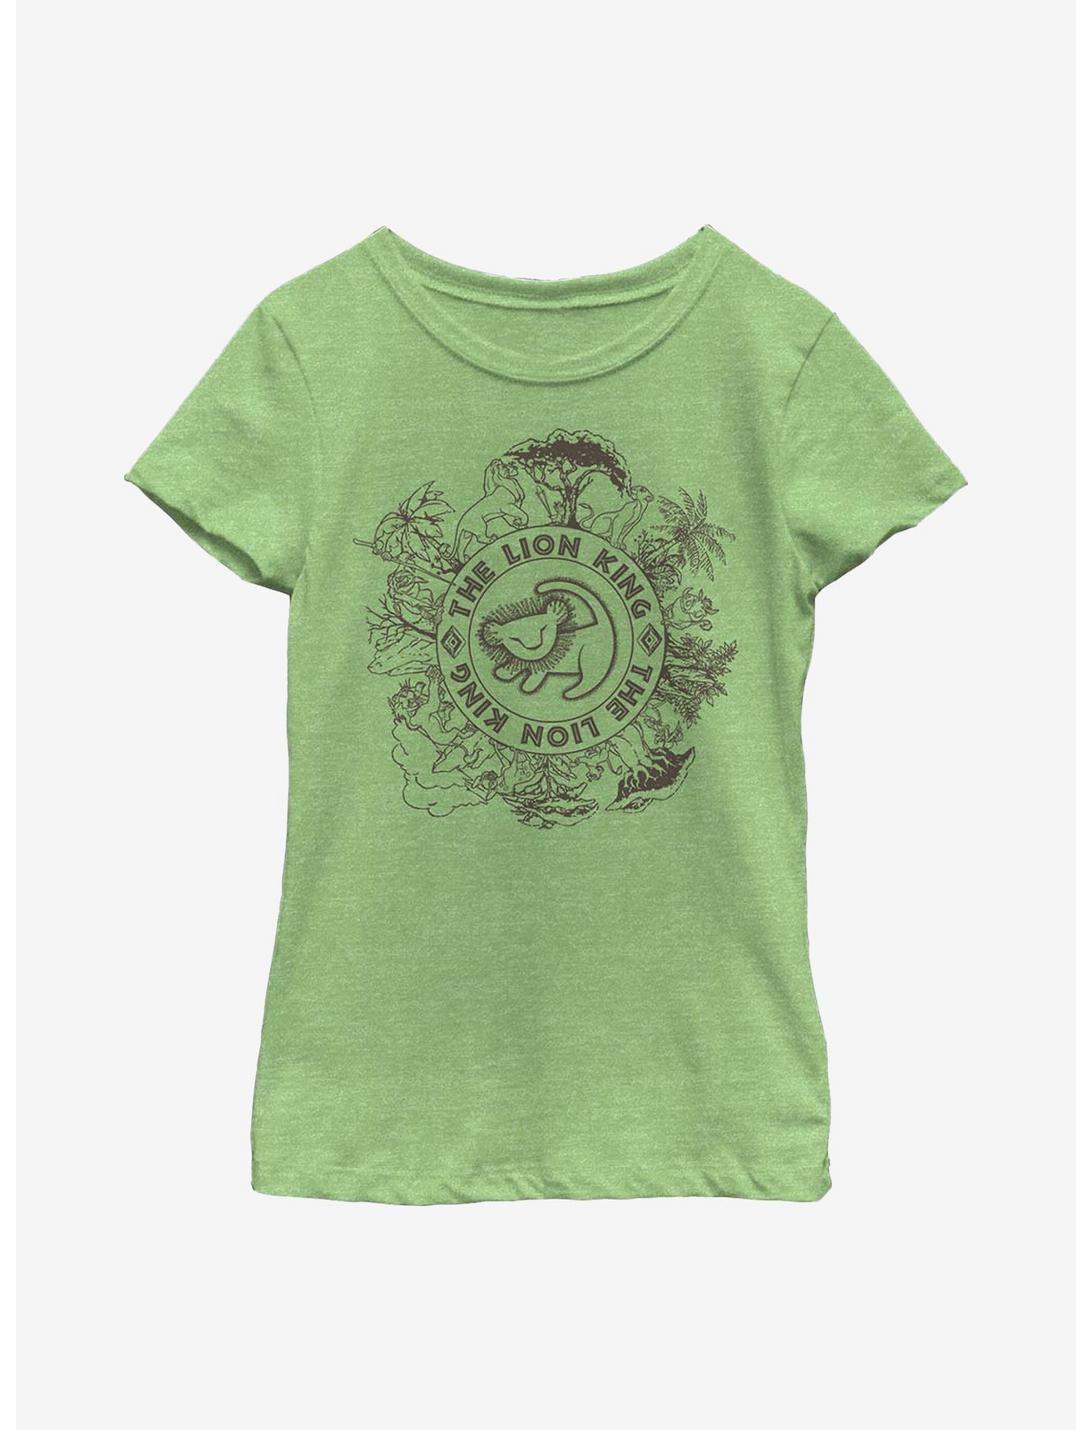 Plus Size Disney The Lion King Circle Of Life Youth Girls T-Shirt, GRN APPLE, hi-res